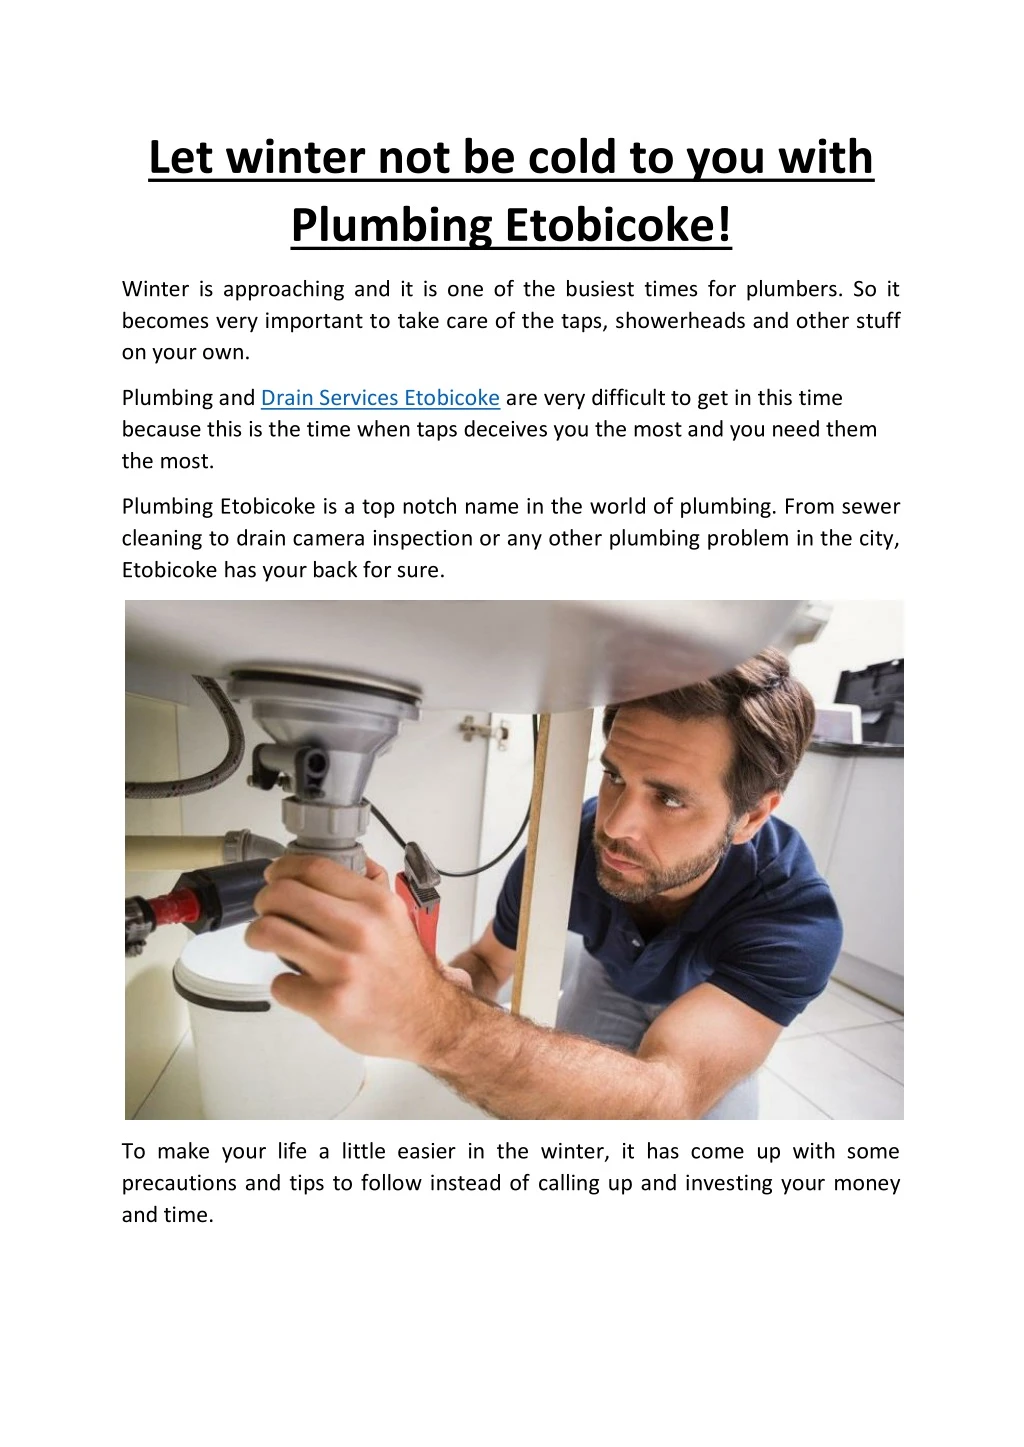 let winter not be cold to you with plumbing